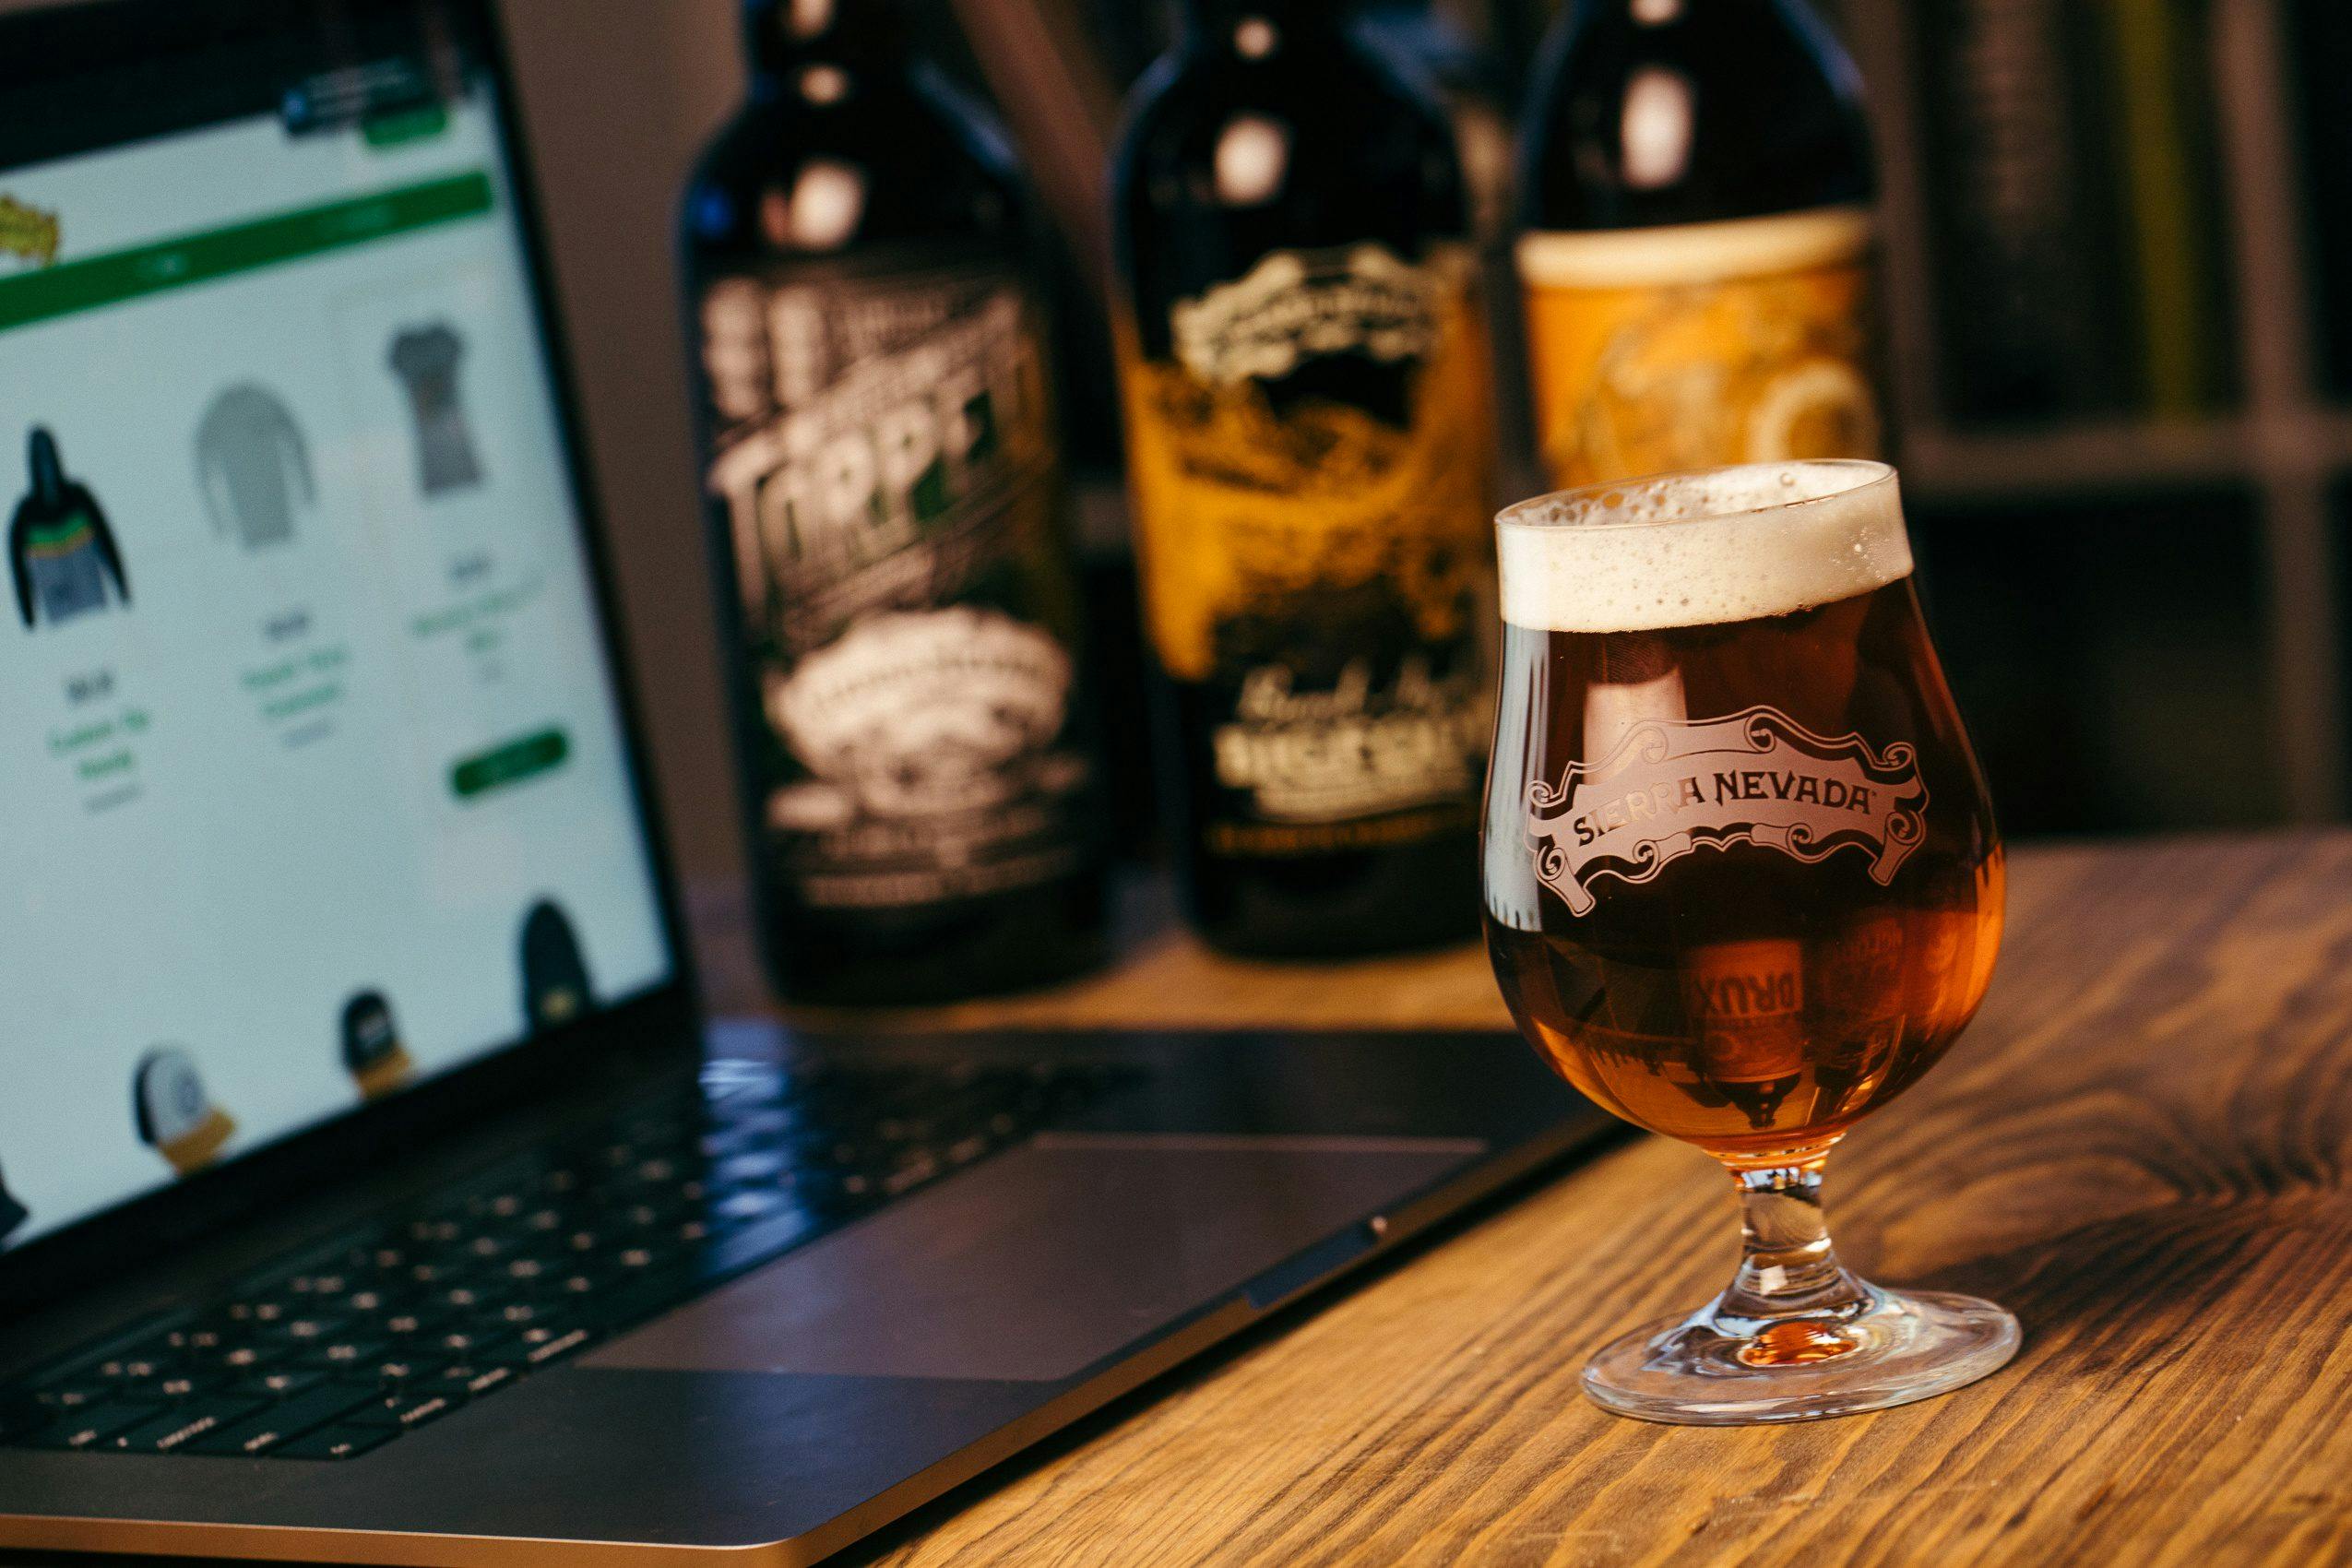 Sun rays shining through several bottles of Sierra Nevada Brewing Company beer and a laptop computer